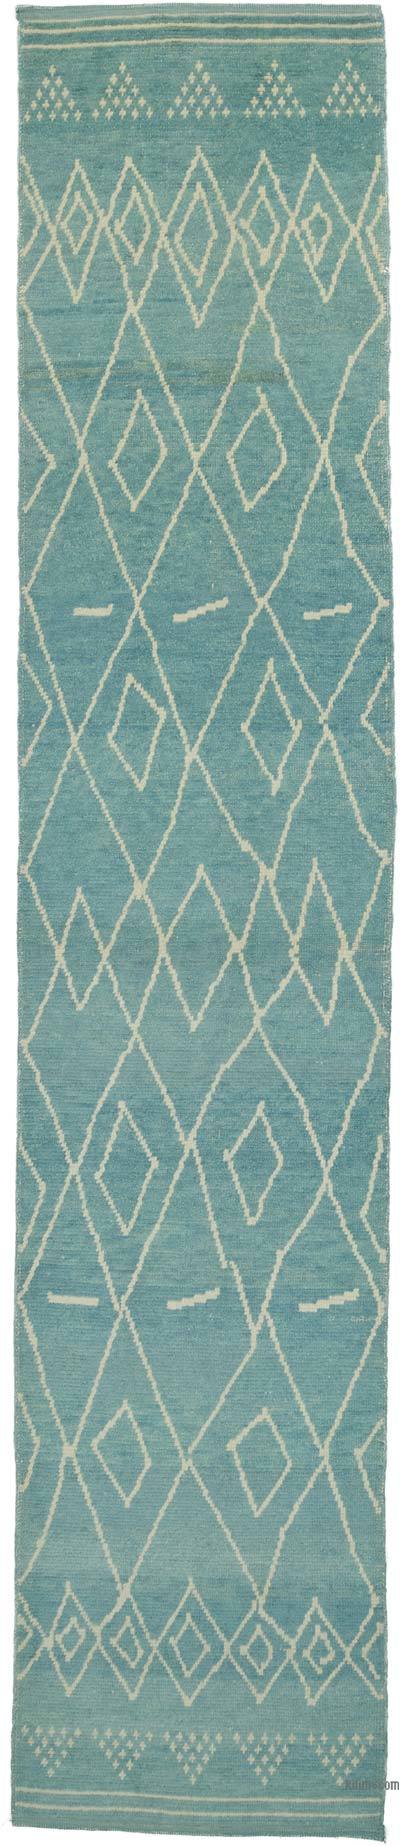 Aqua New Moroccan Style Hand-Knotted Runner - 2' 11" x 14' 7" (35 in. x 175 in.)